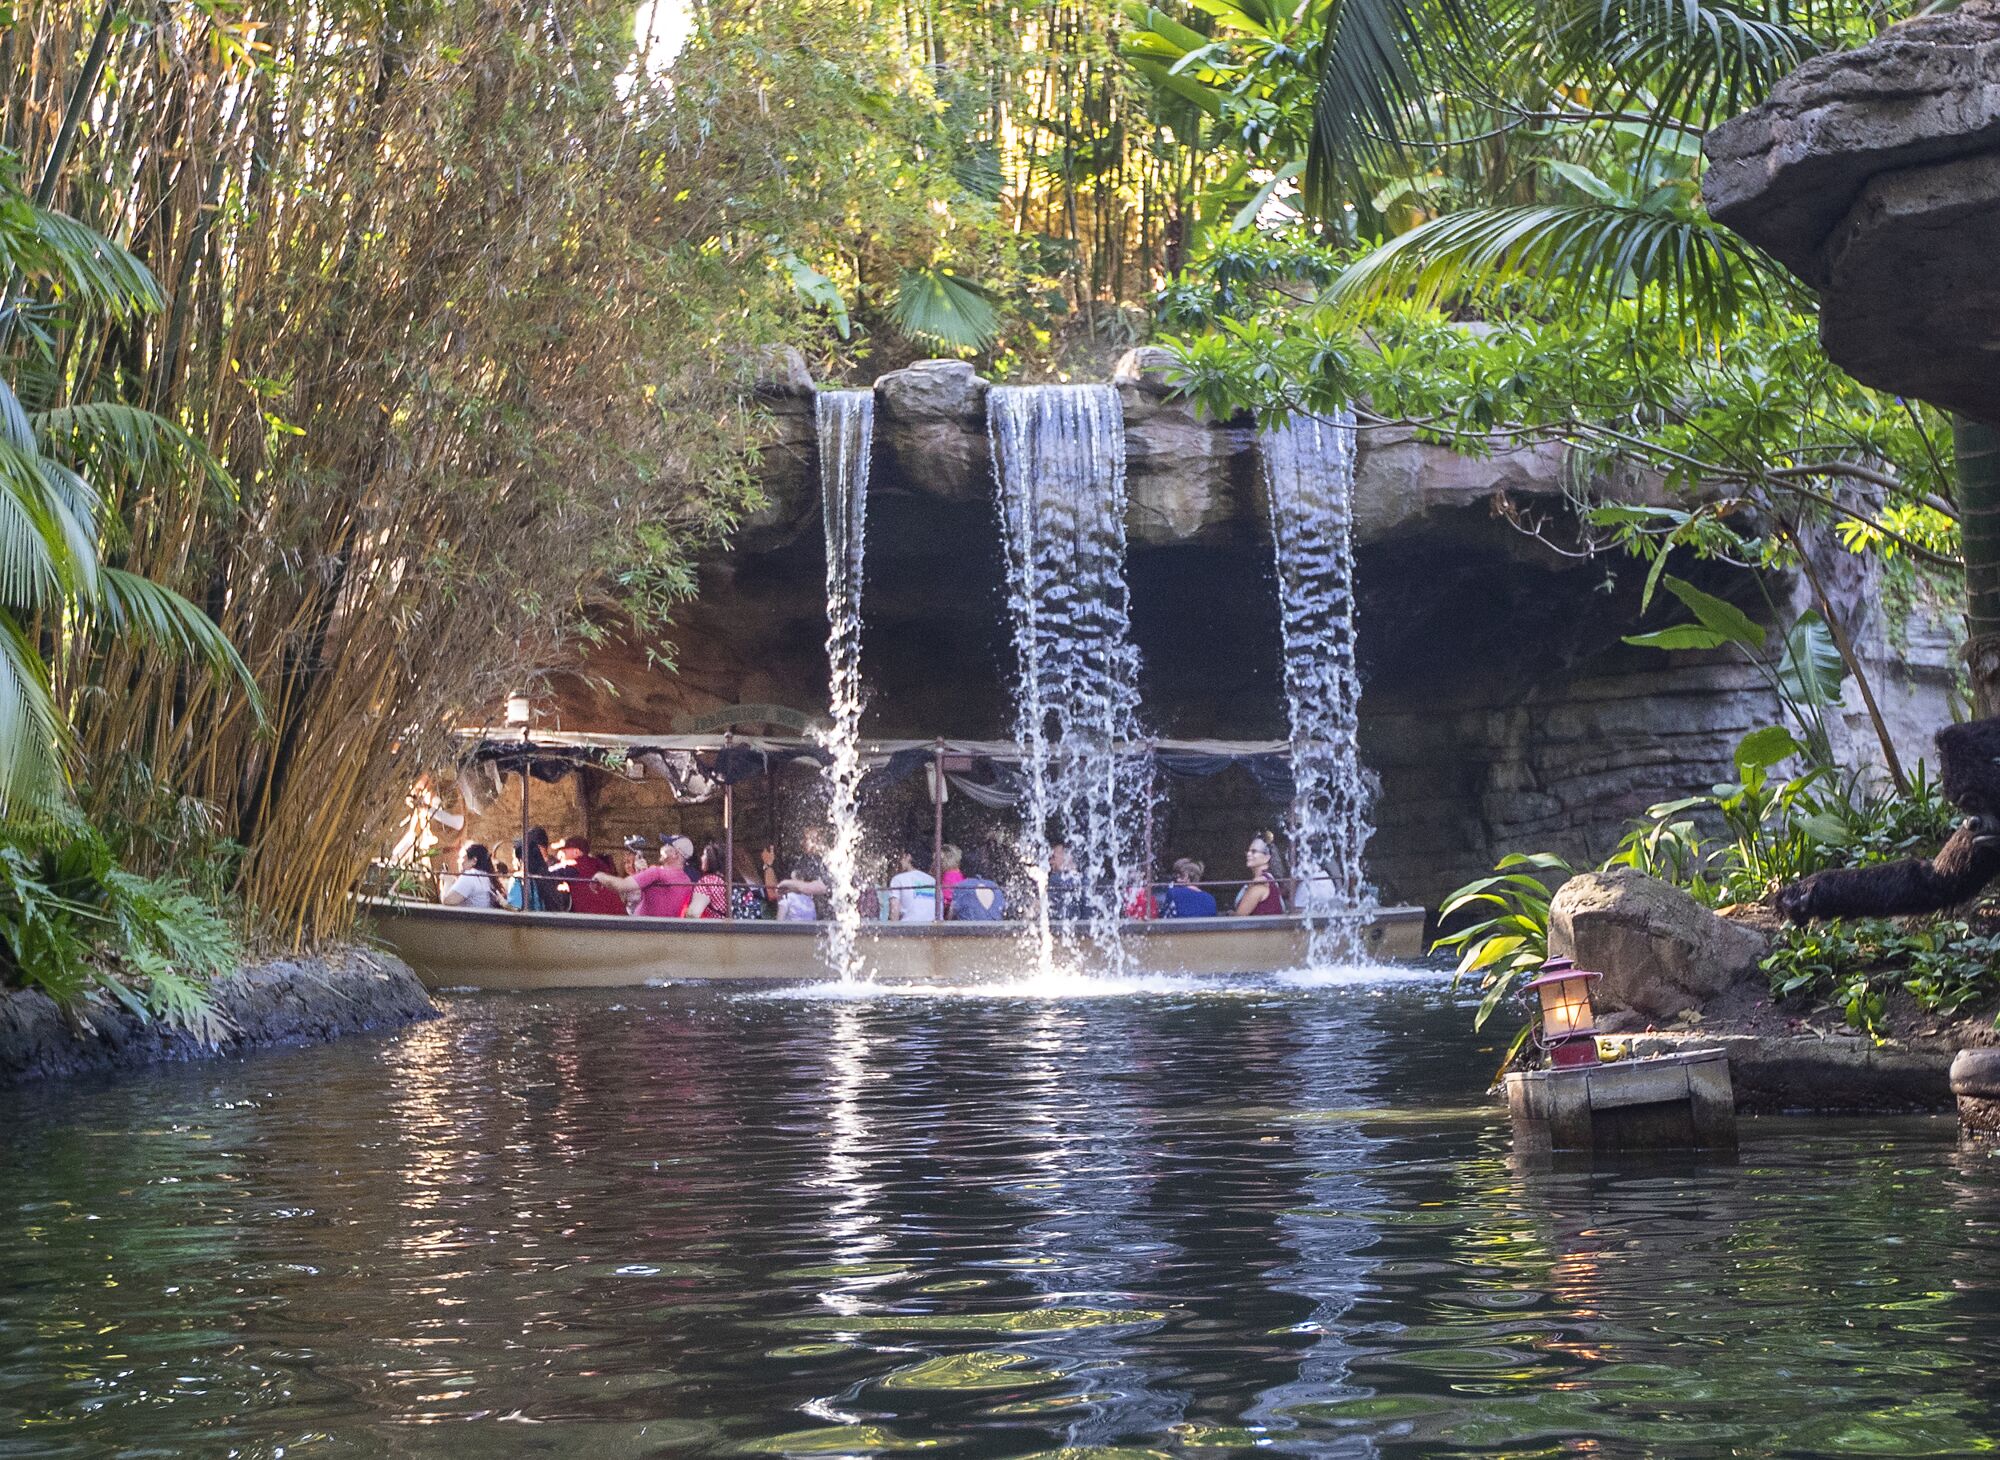 Riders pass under waterfalls at Schweitzer Falls during the Jungle Cruise ride.